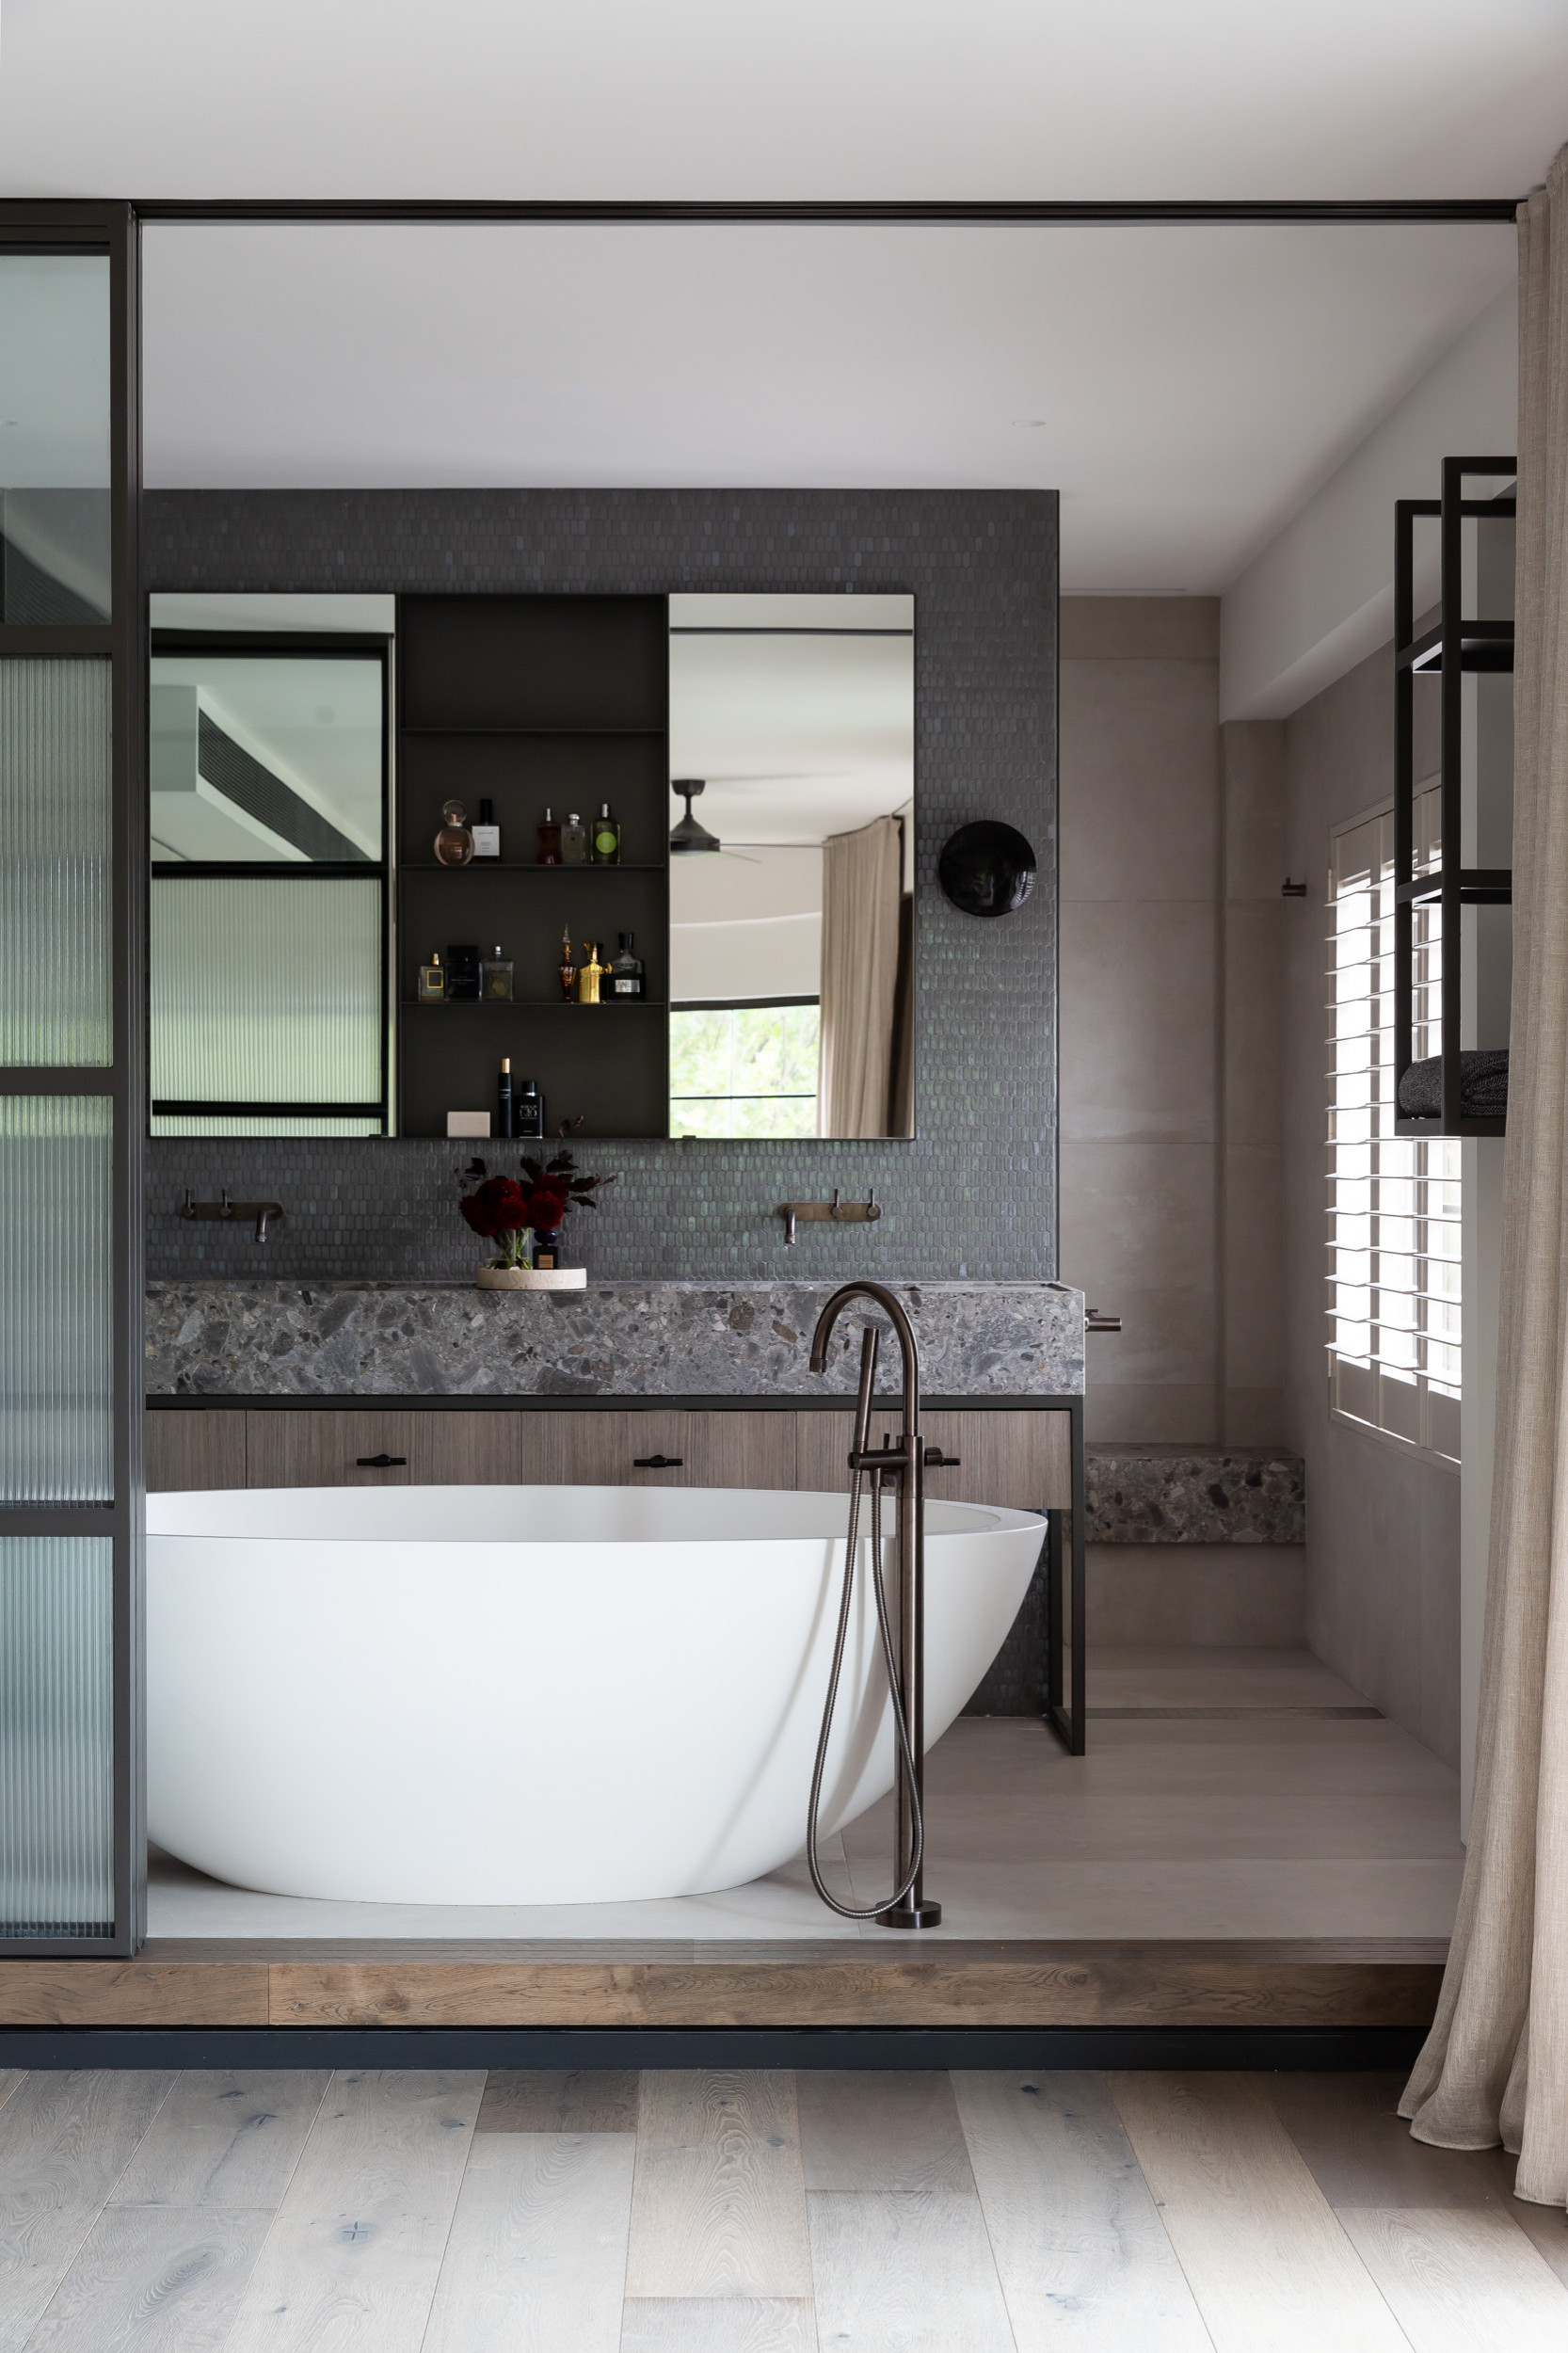 Black and White Bathroom Design: Beauty and Simplicity